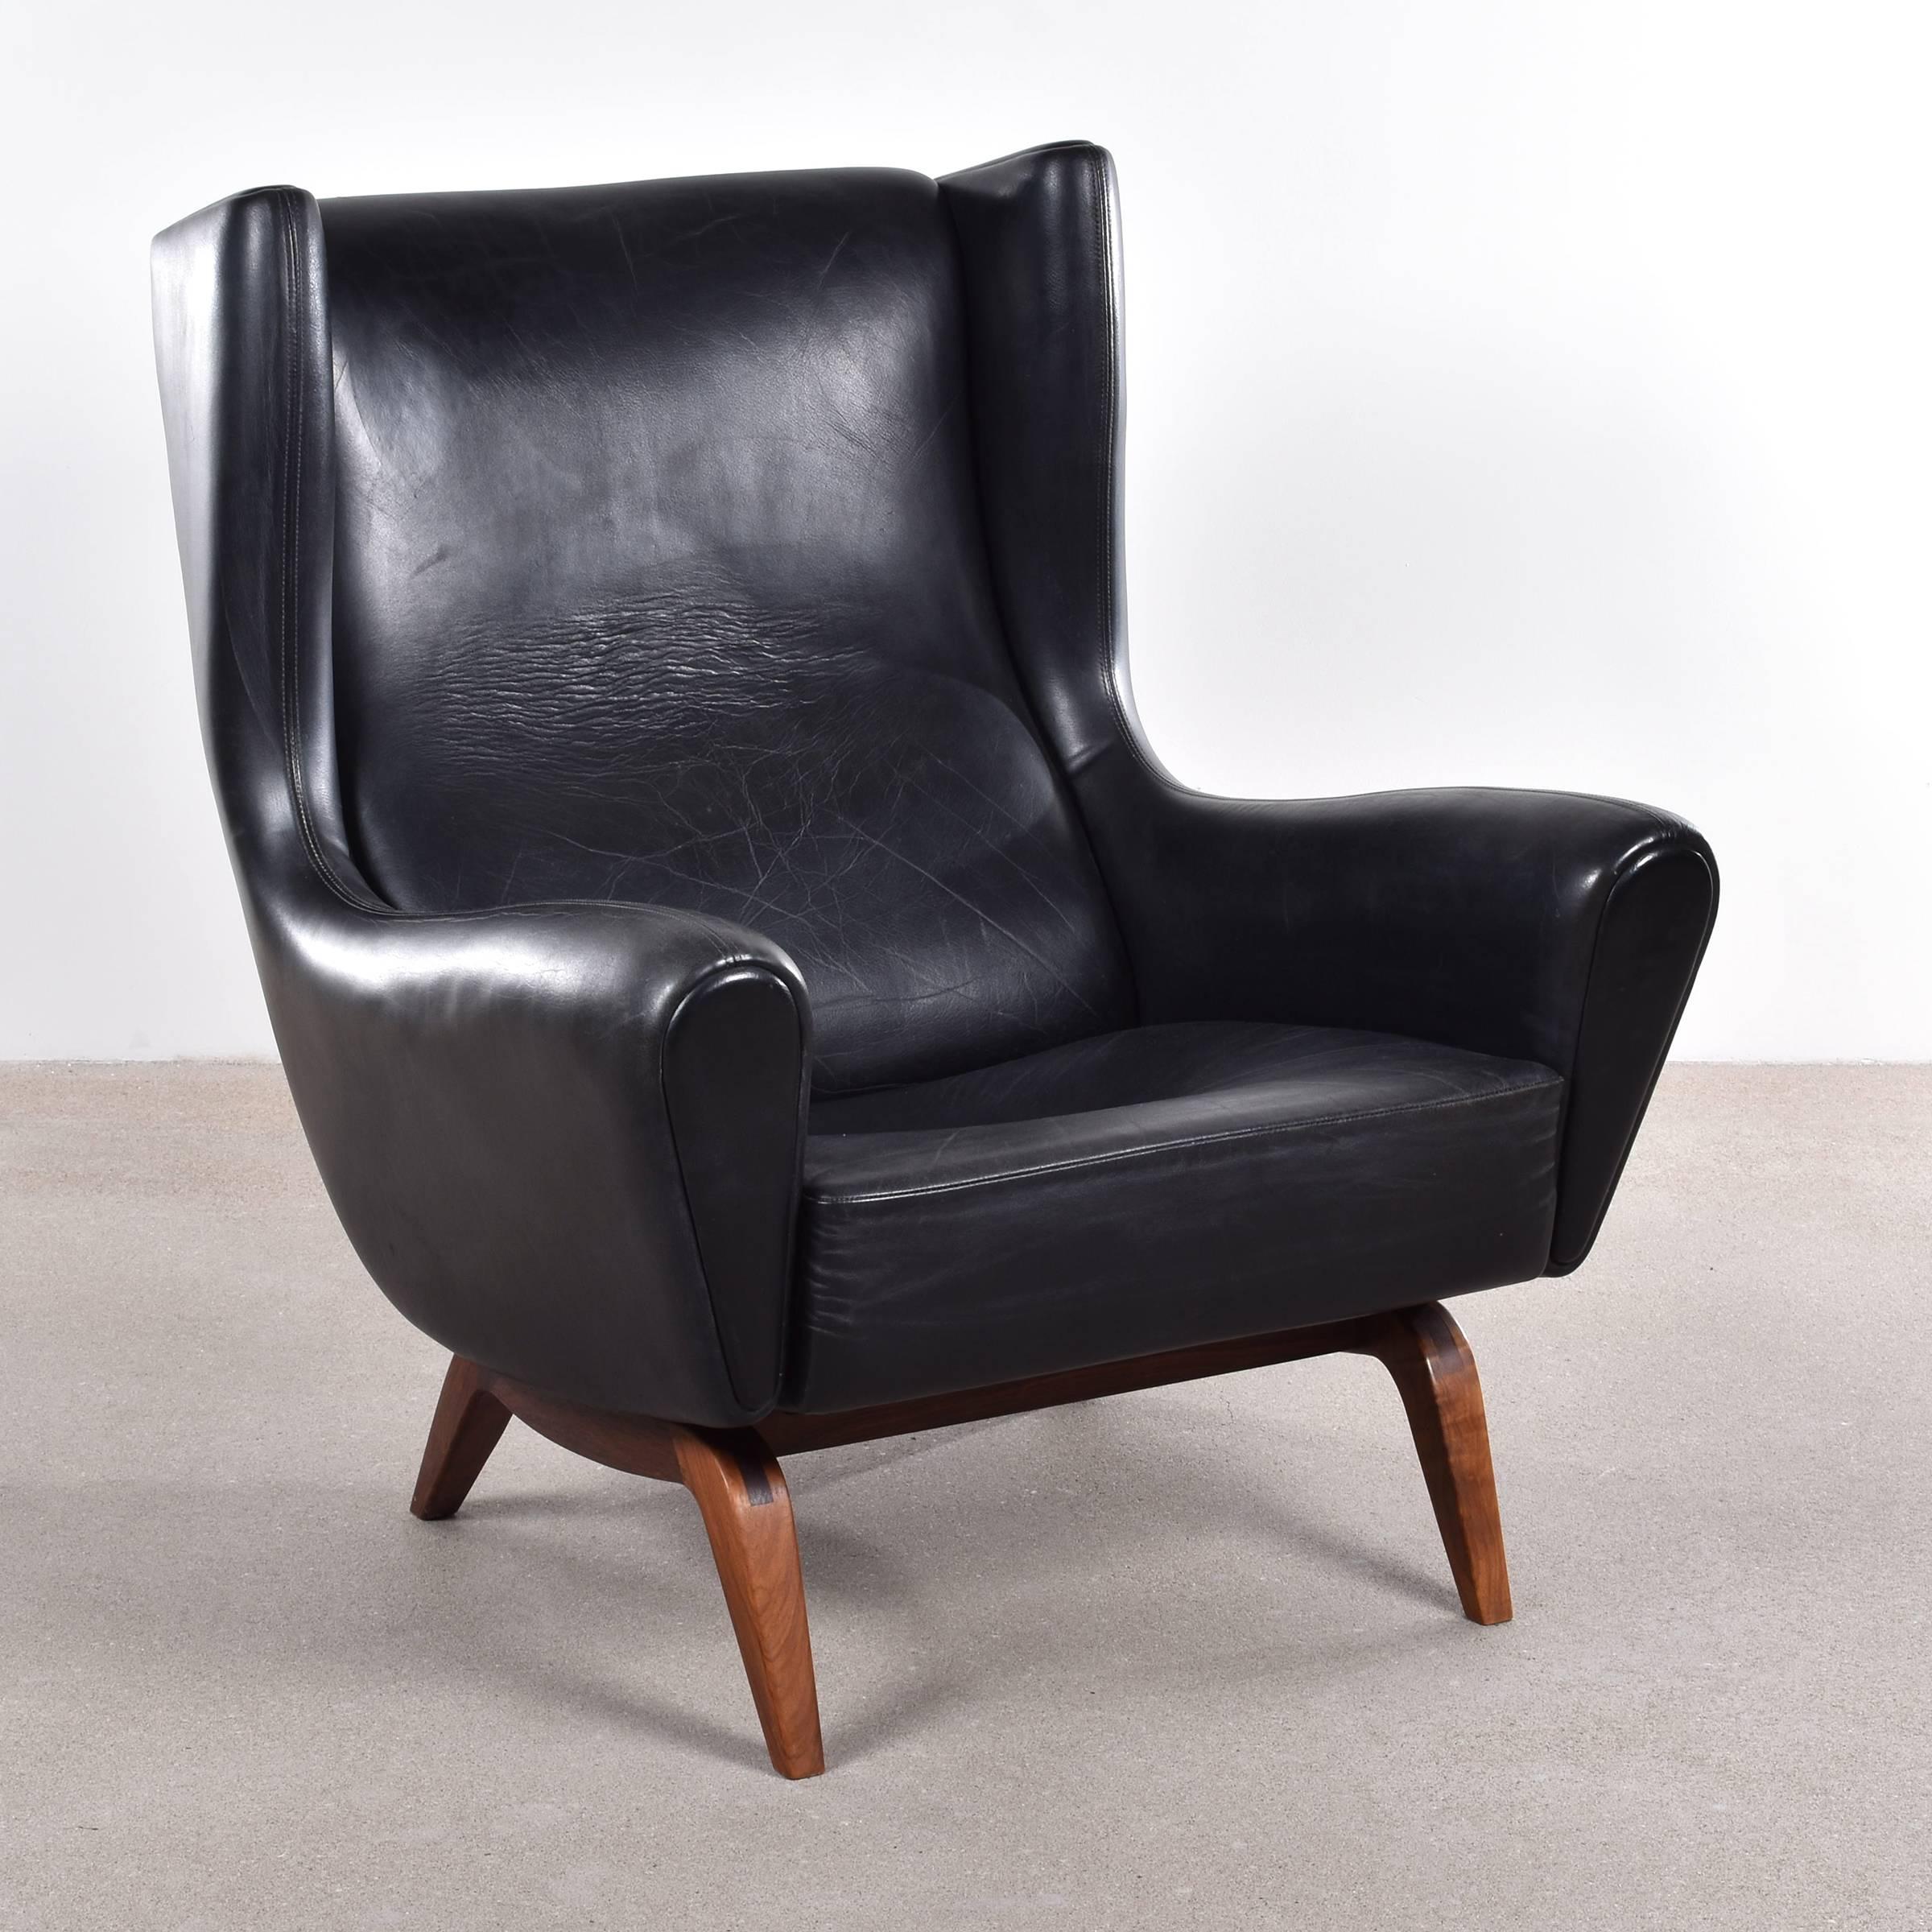 Beautiful and extremely comfortable organic lounge chair with original strong black leather and graceful legs.

Free shipping for European destinations!

We strive for a high level of service and offer: White glove shipping, parcel shipping and